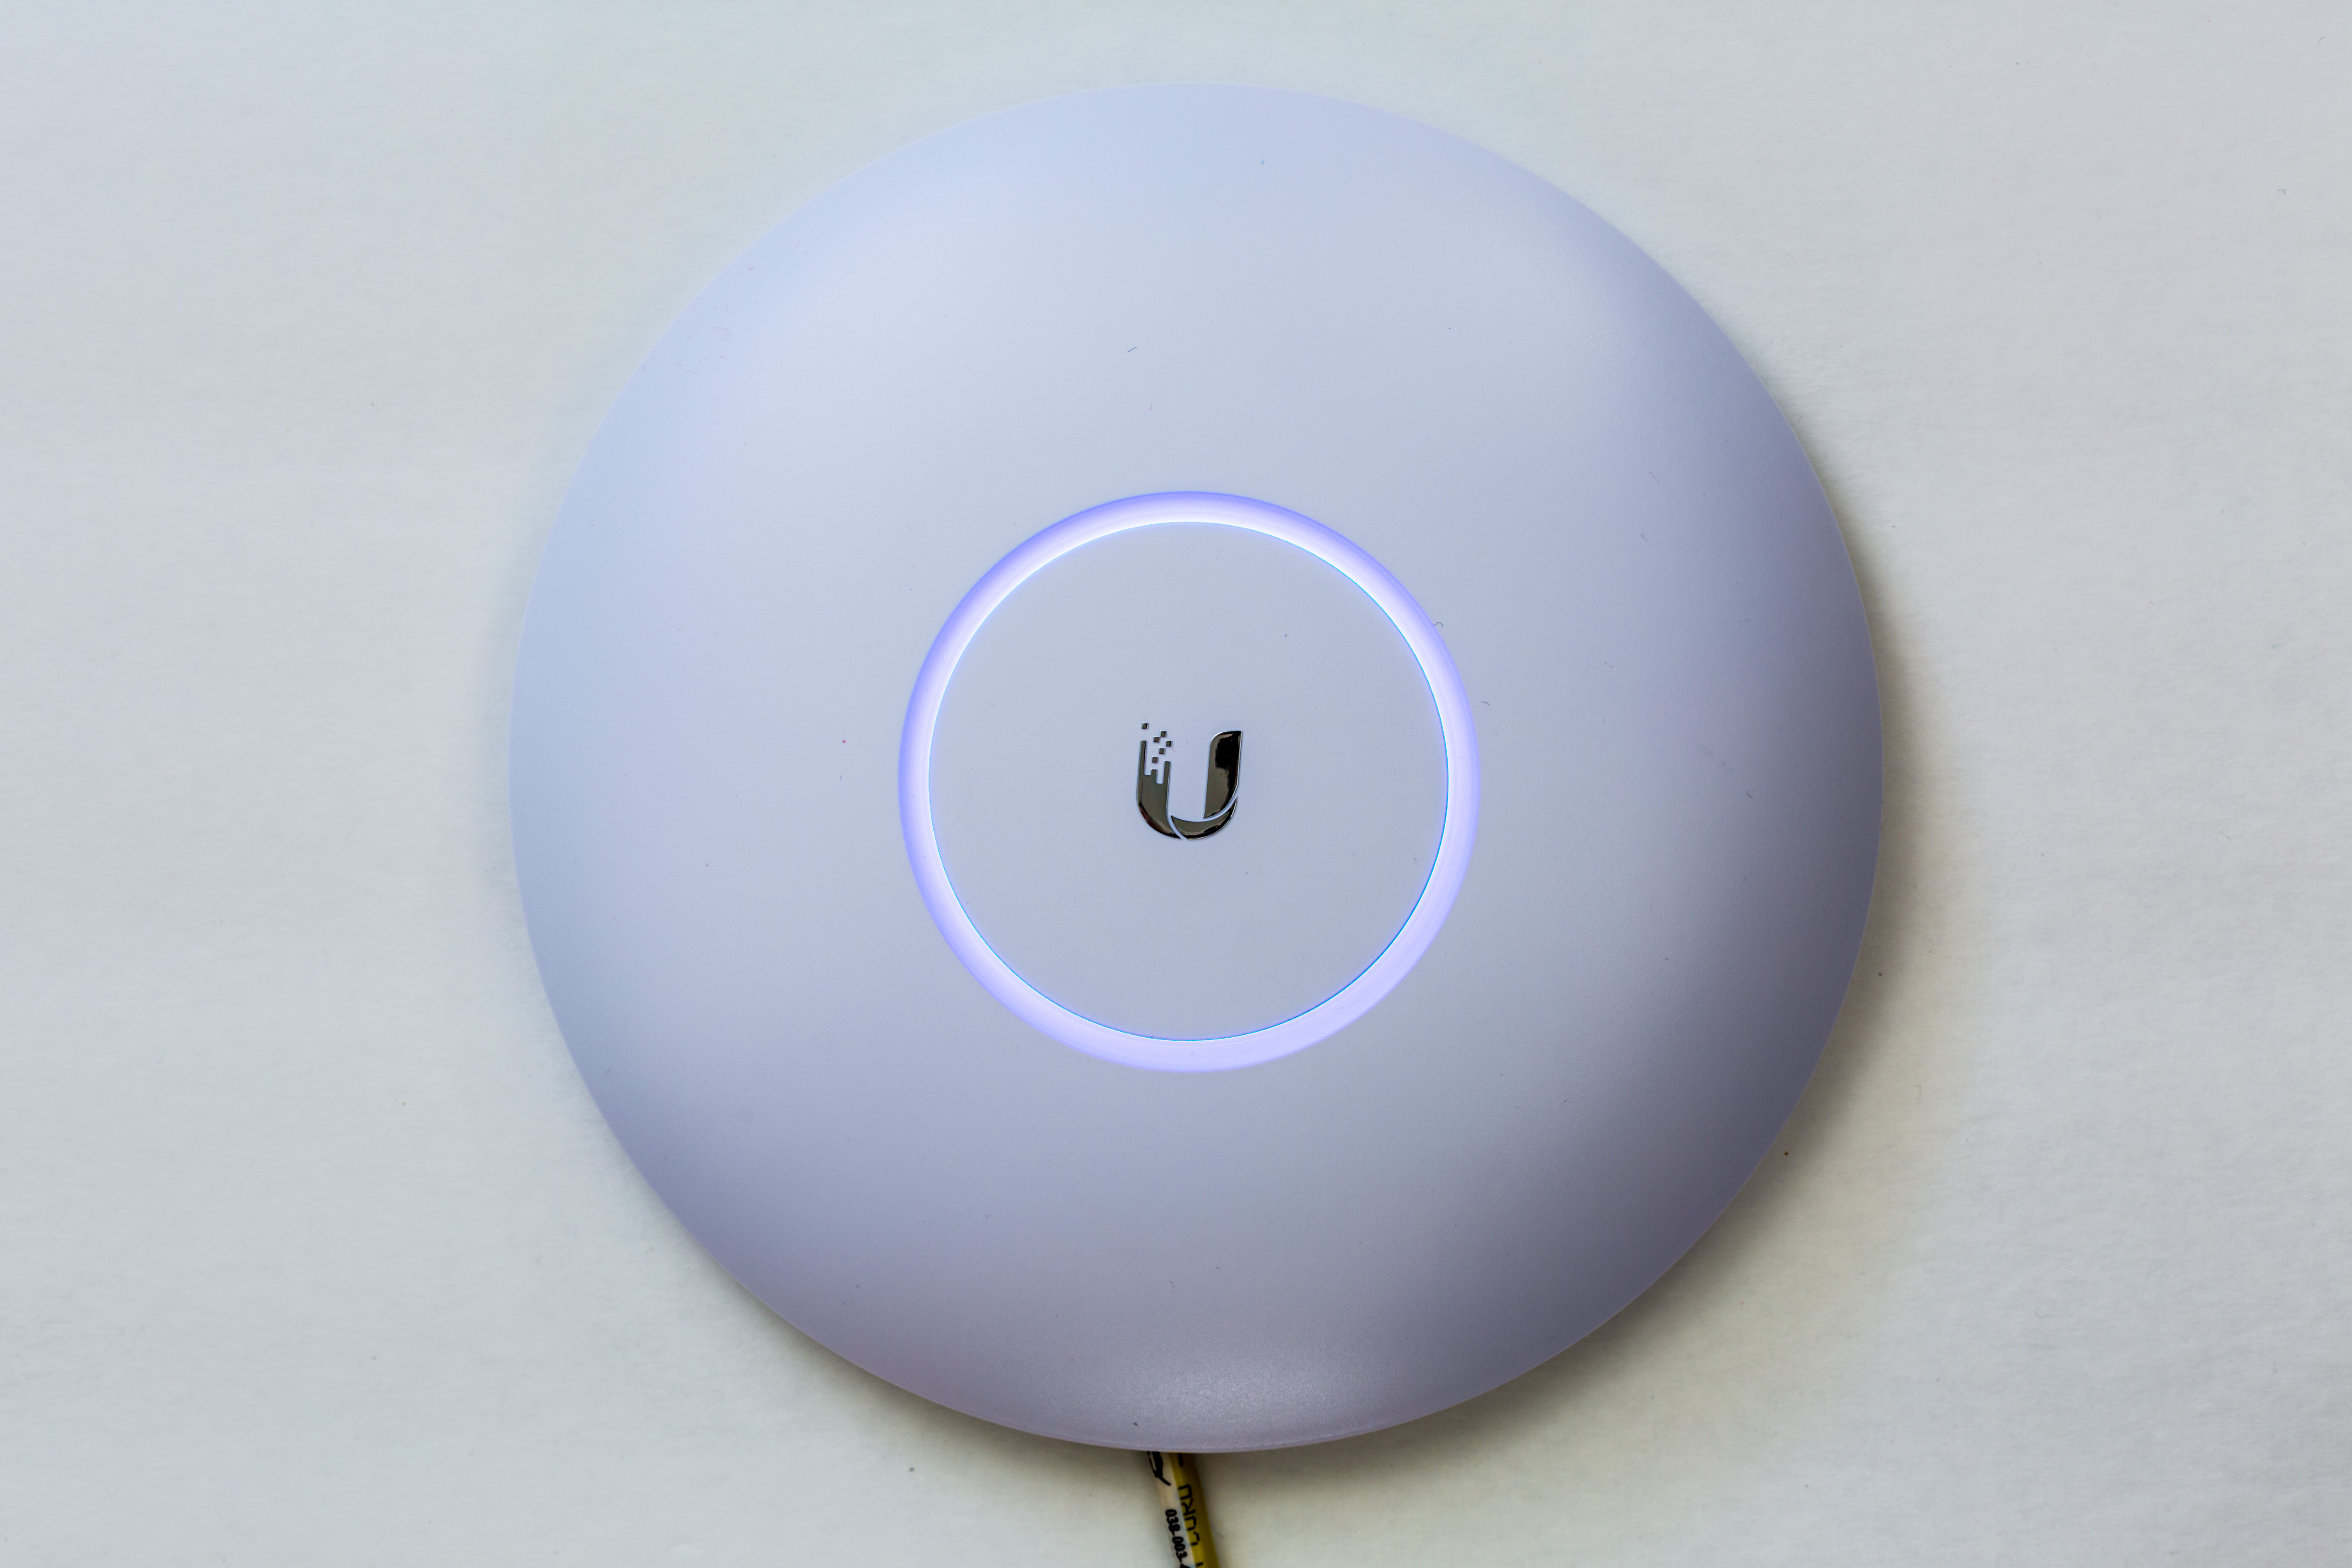 Sadly deck twin Review: Ubiquiti UniFi made me realize how terrible consumer Wi-Fi gear is  | Ars Technica